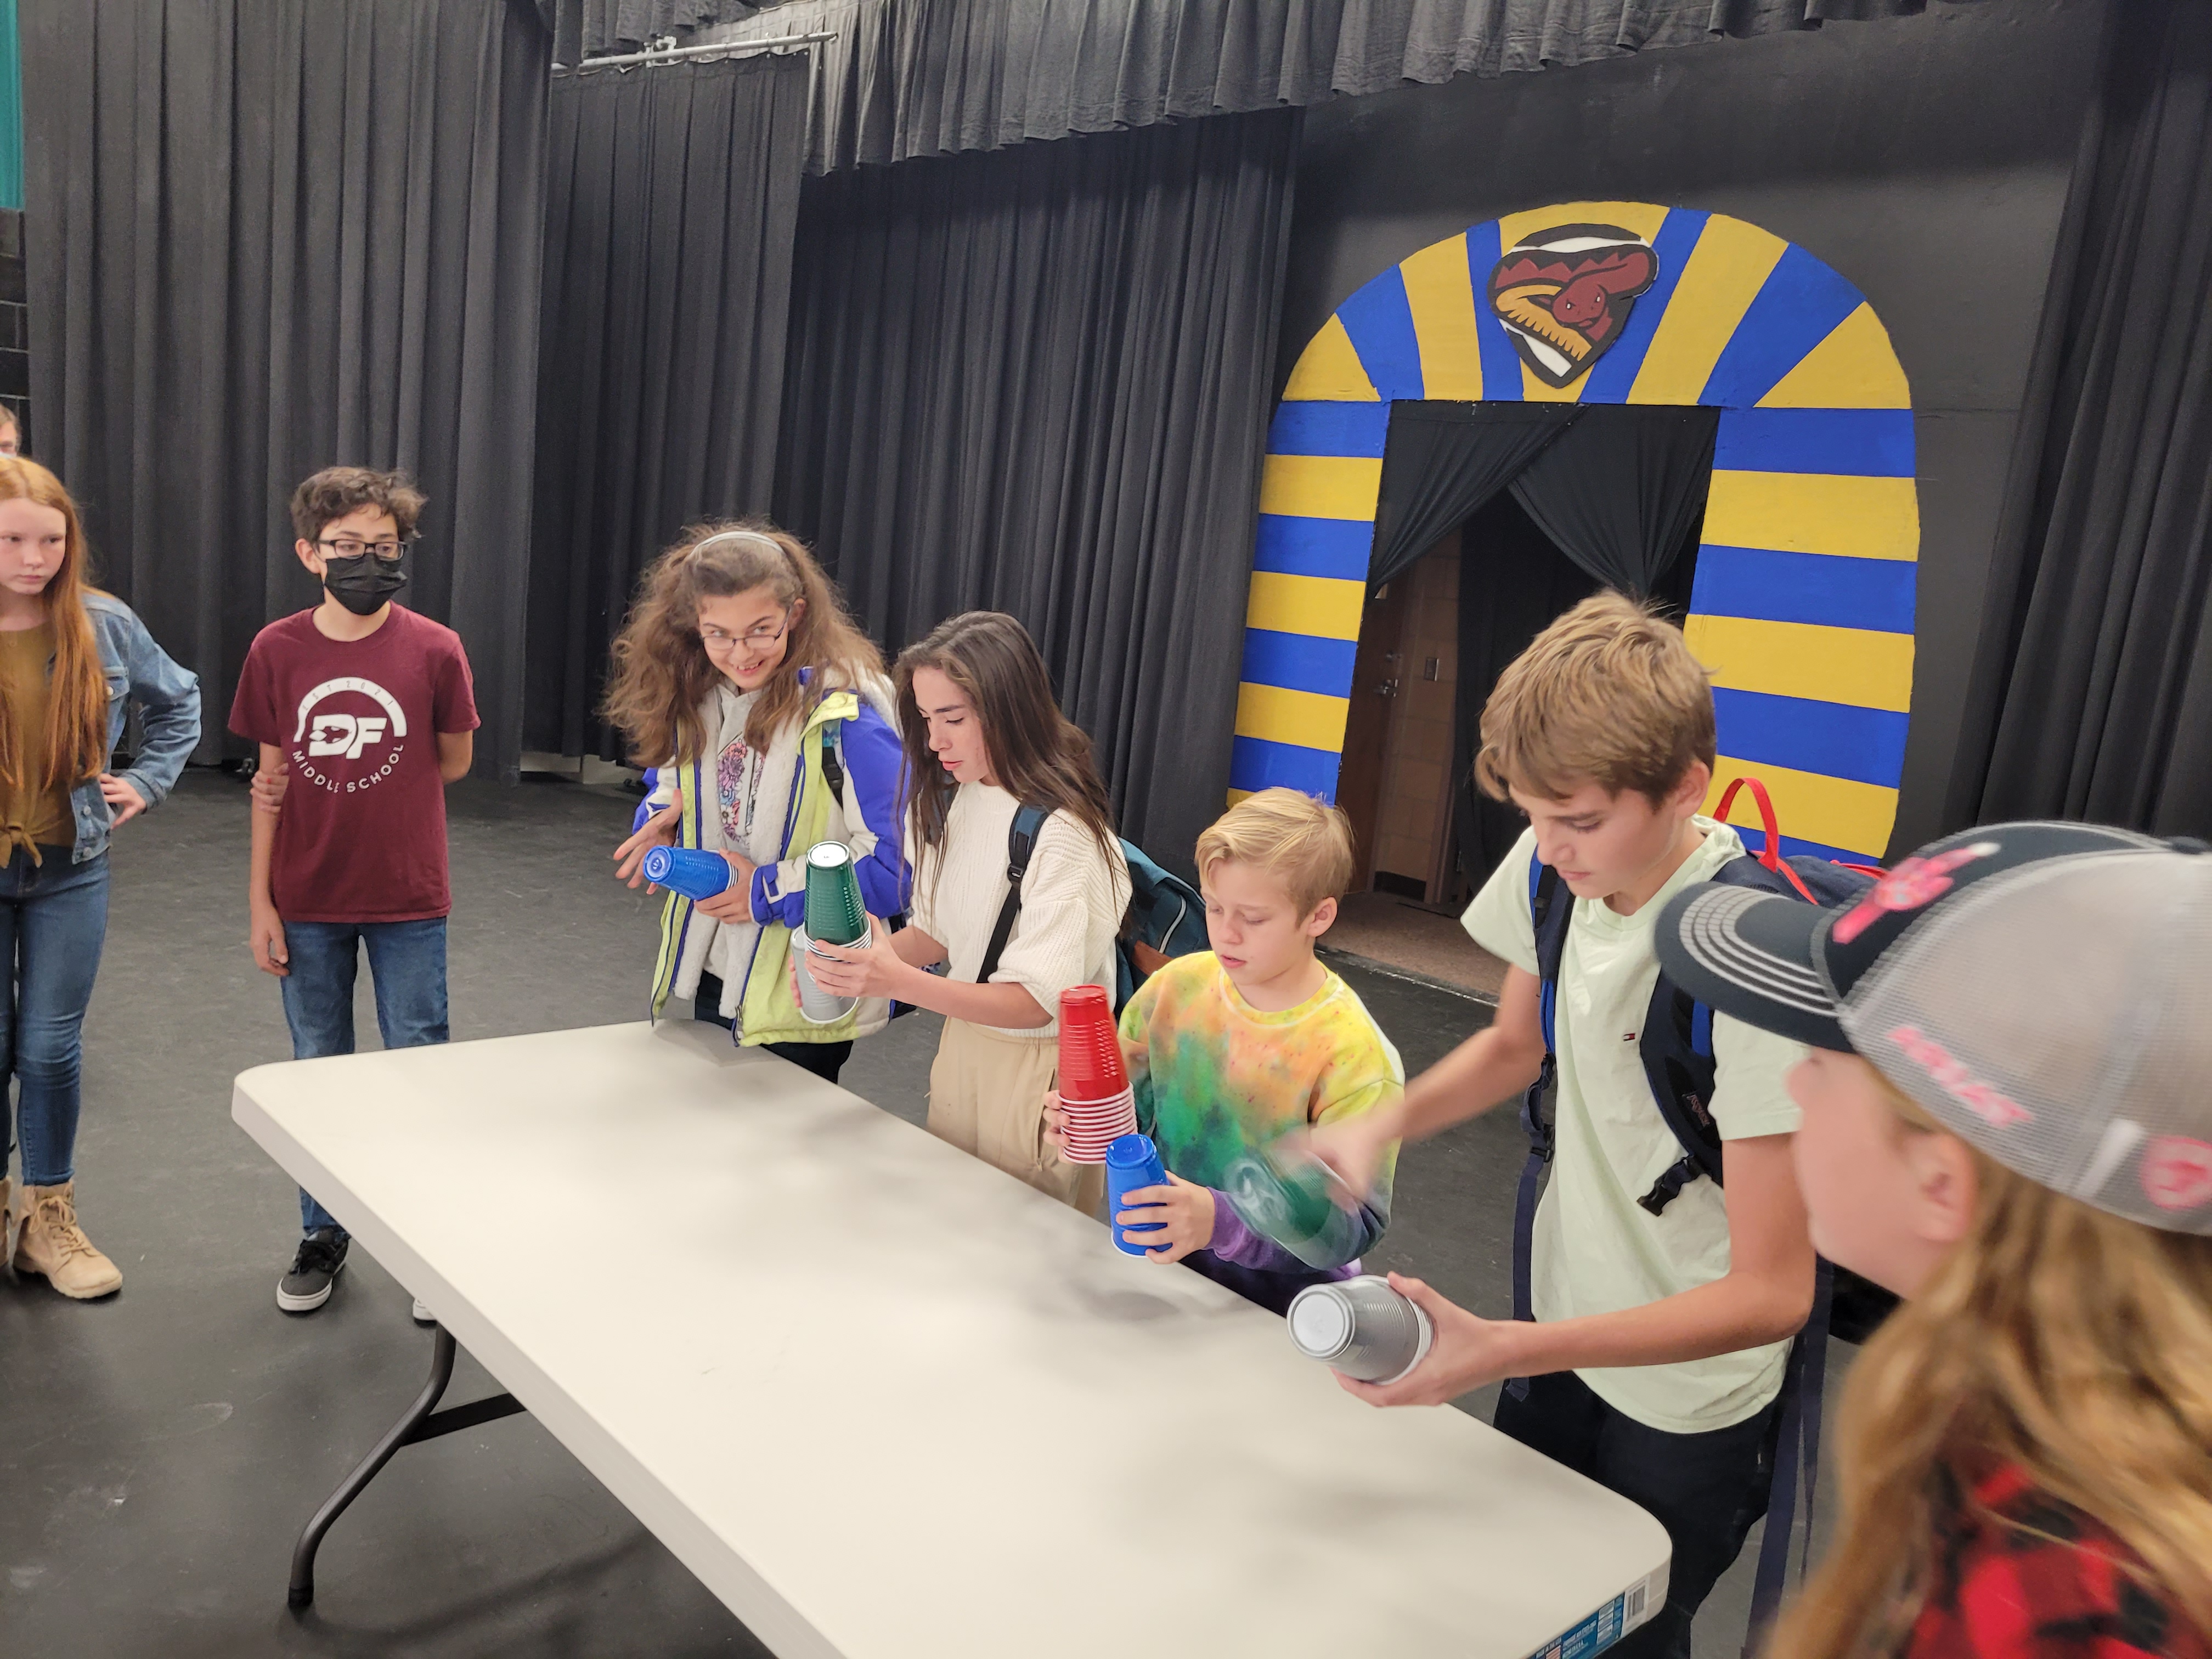 students competing in the cup stacking game